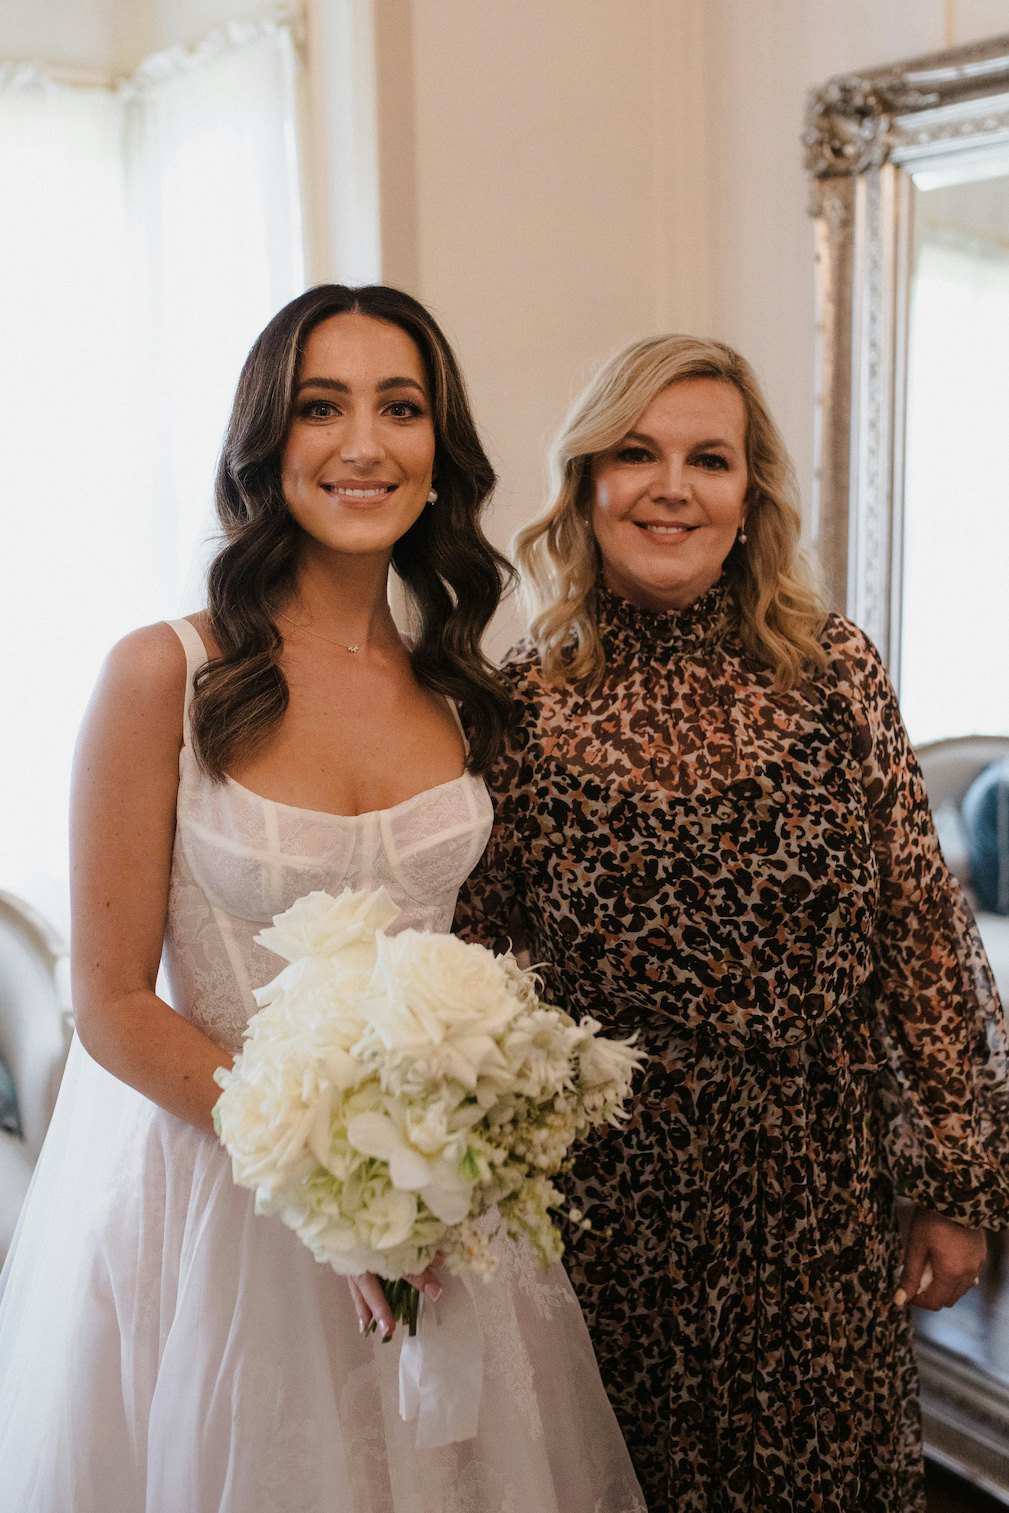 Bride and mother-of-the-bride